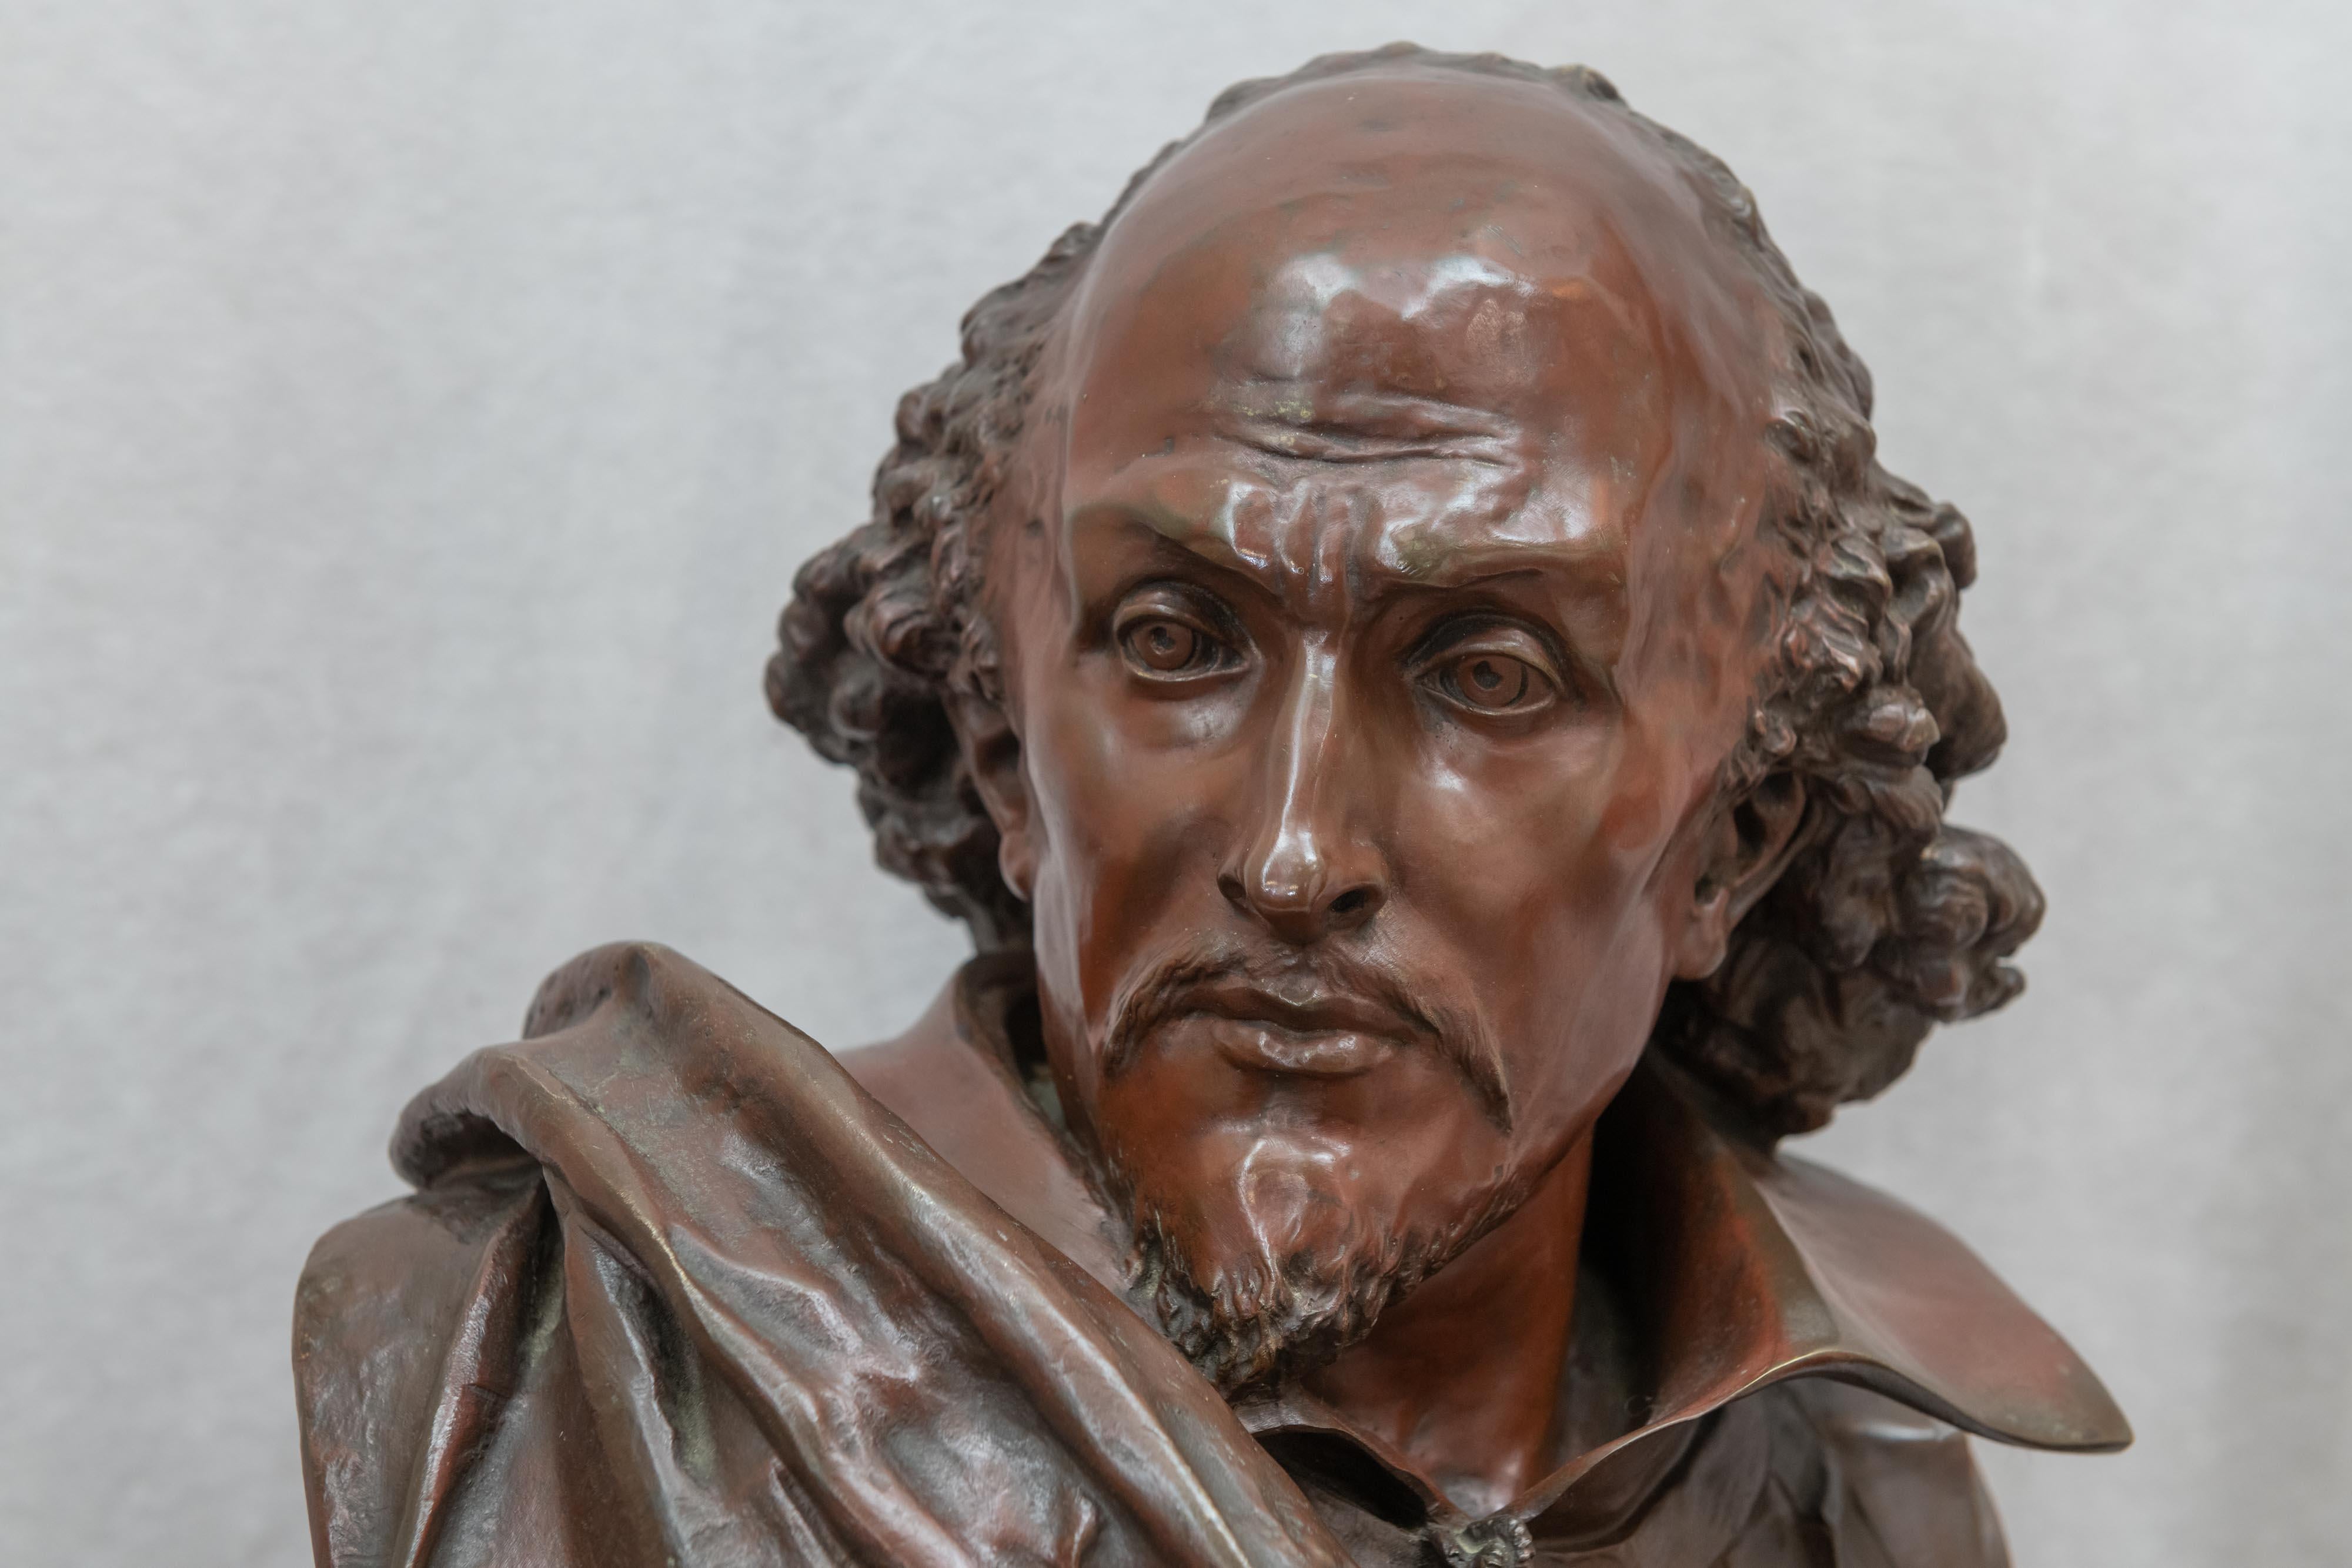 Beaux Arts Bronze Bust of Wm. Shakespeare, French, Late 19th Century by Carrier Belleuse